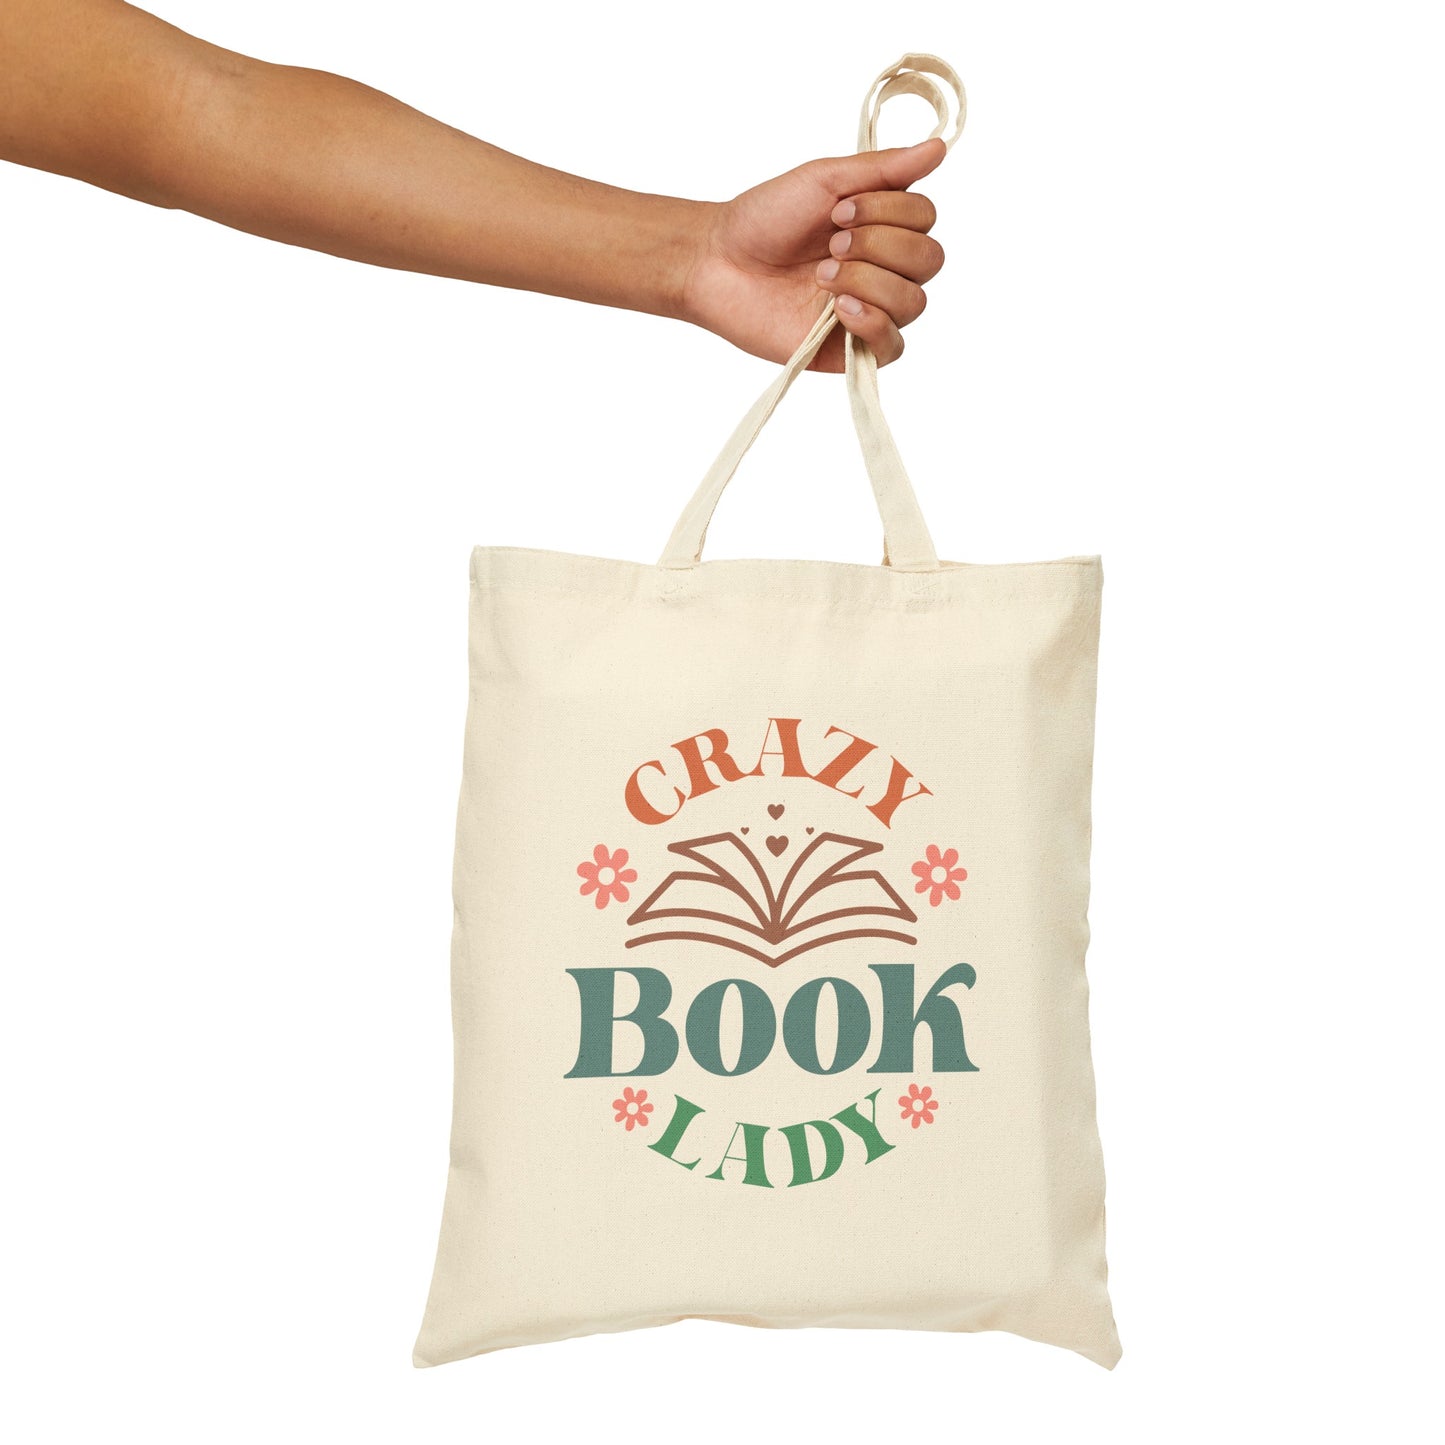 Crazy Book Lady Tote Bag - Book Lovers